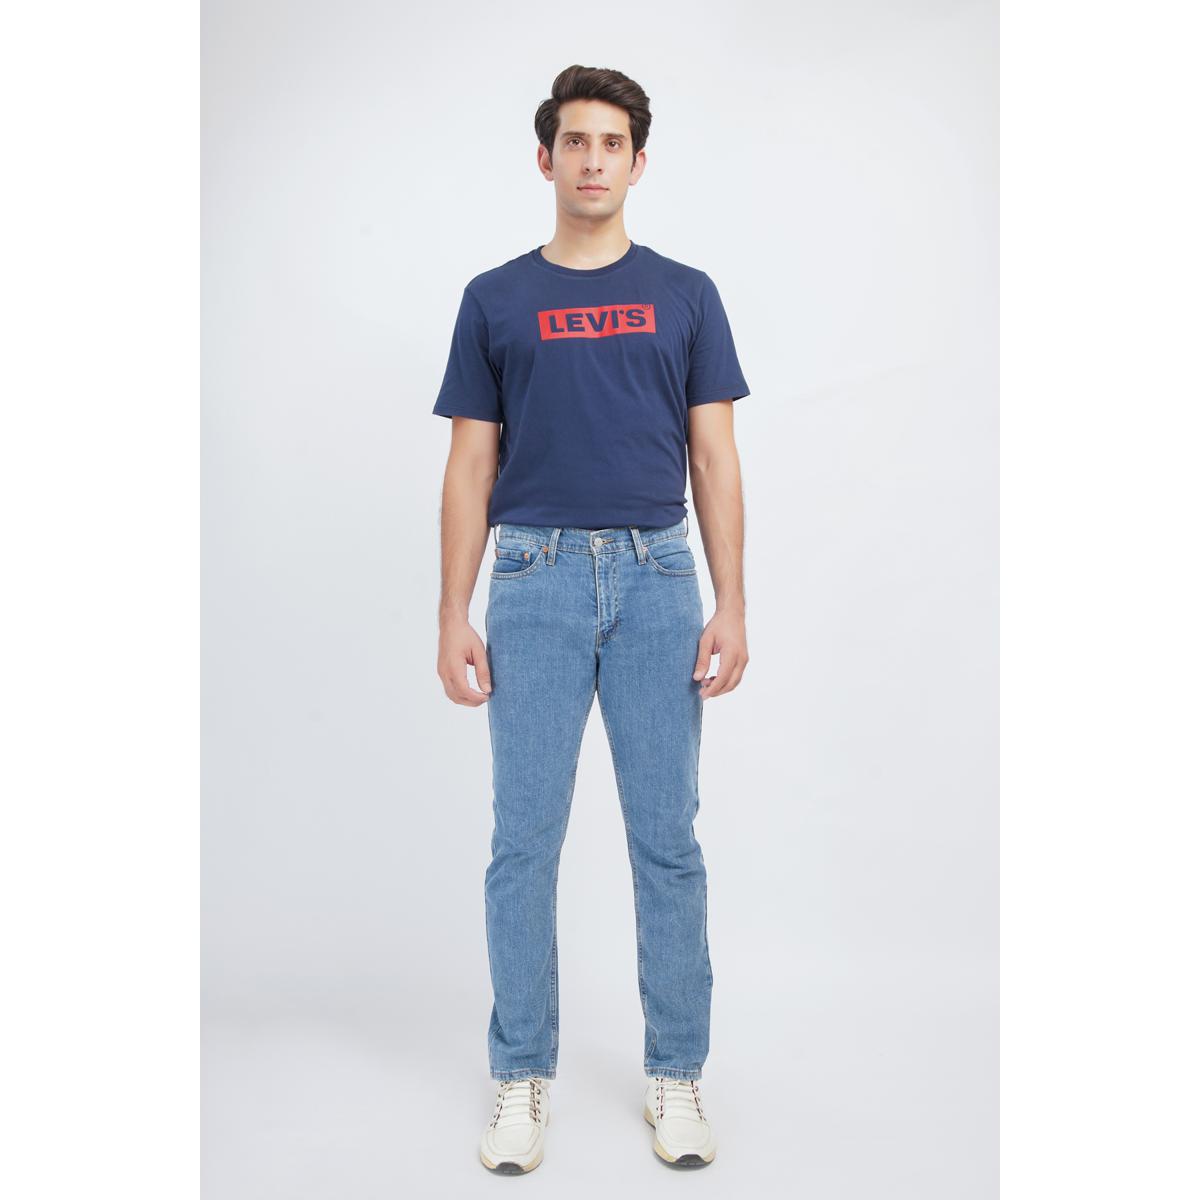 180+ Levis Clothing in Pakistan with Best Price (Nov, 2022)